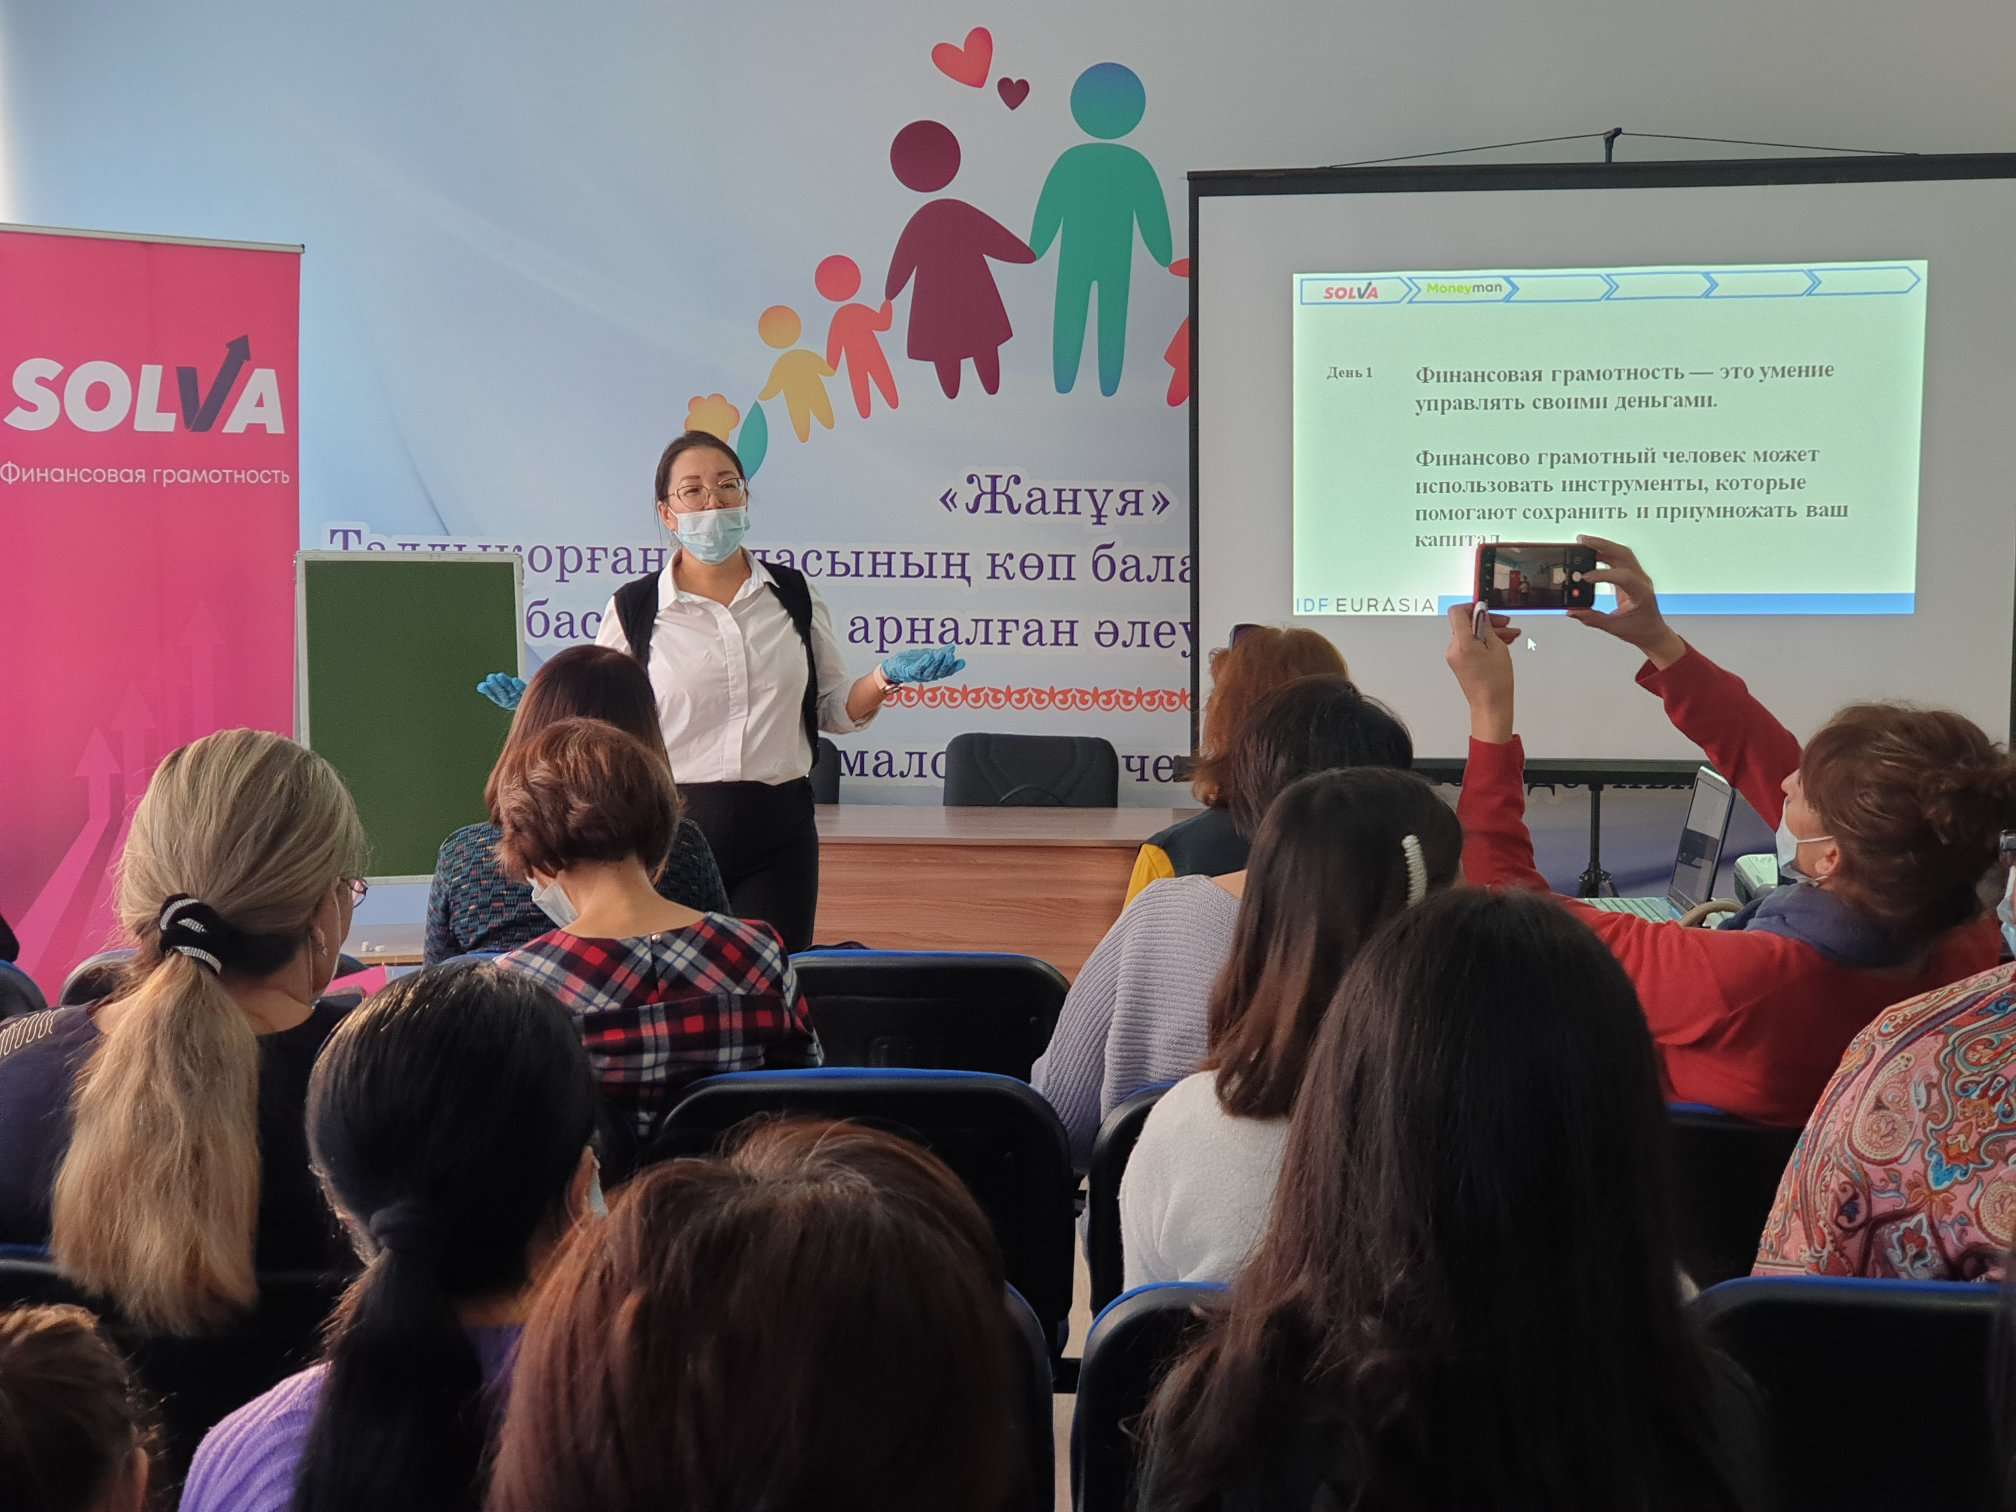 IDF Eurasia in Kazakhstan completed the second stage of financial literacy seminars